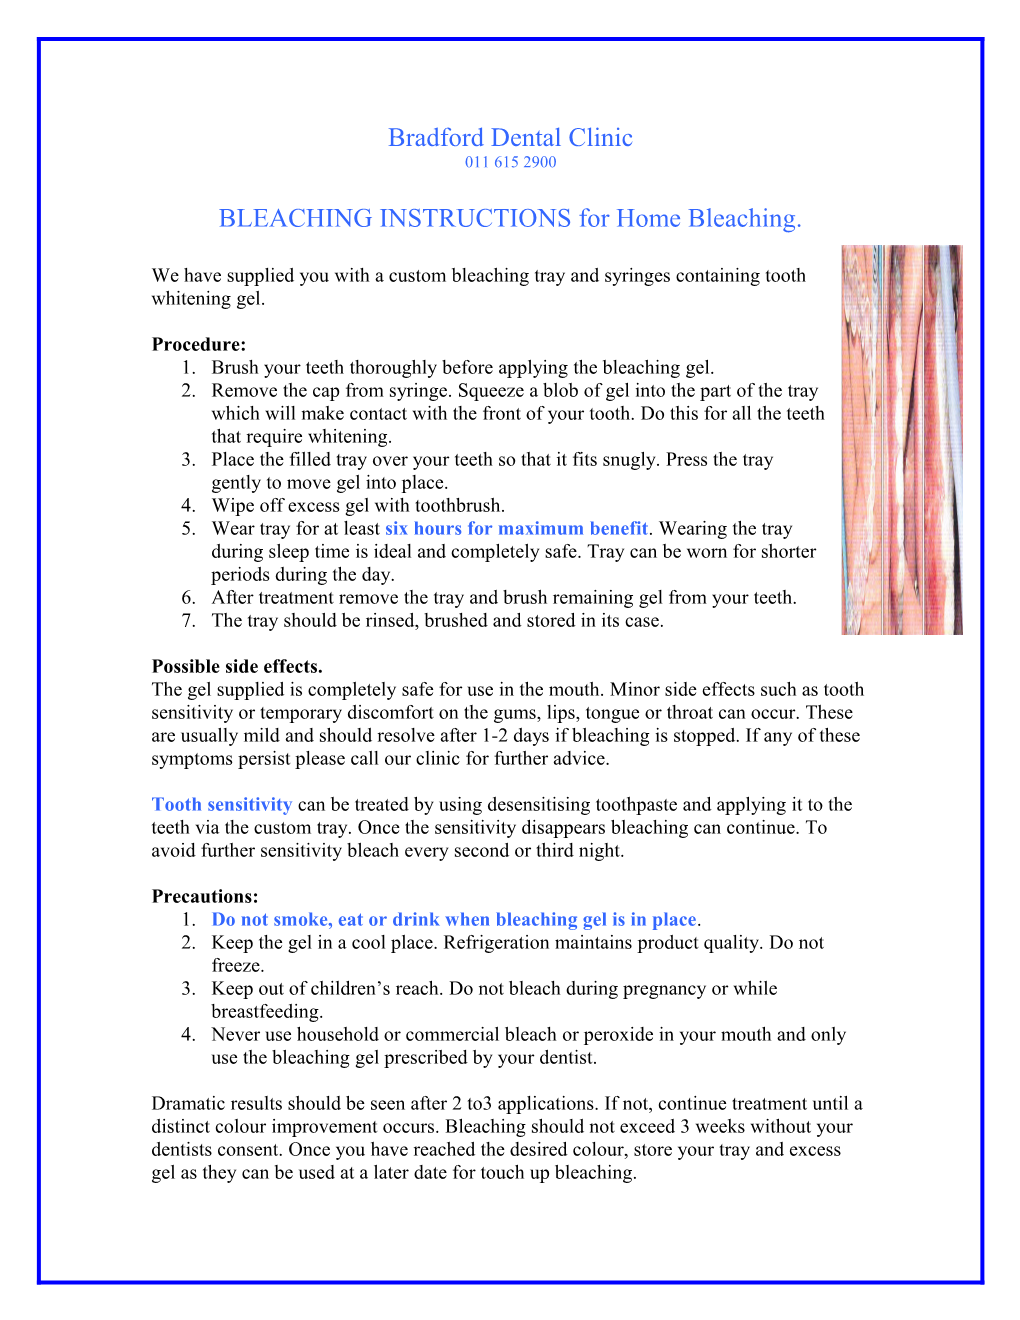 BLEACHING INSTRUCTIONS for Home Bleaching